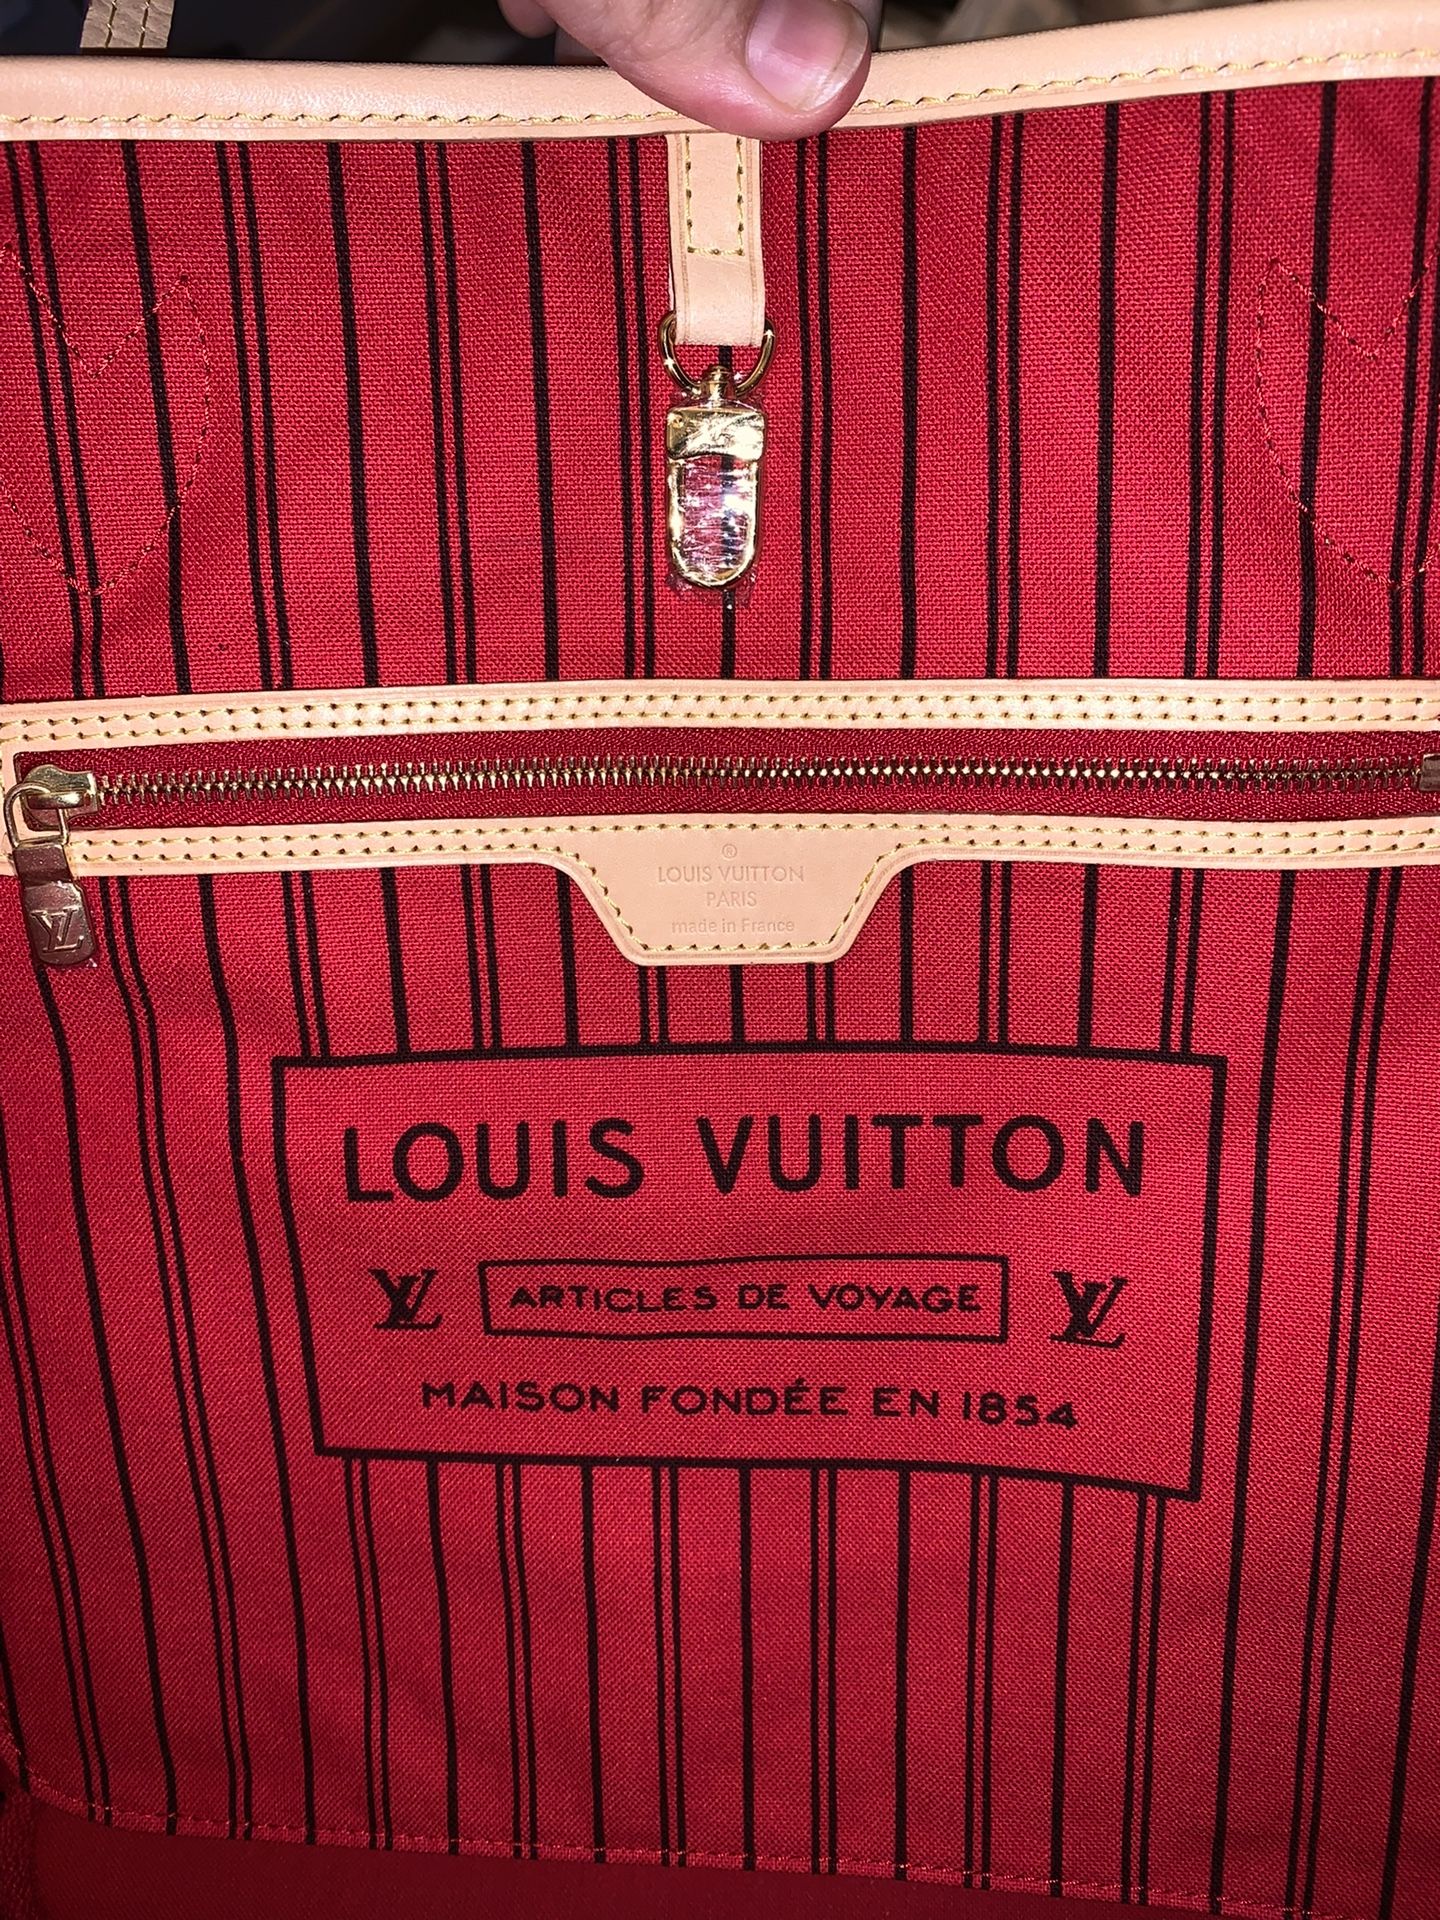 Louis Vuitton Neverfull MM for Sale in Moore, SC - OfferUp